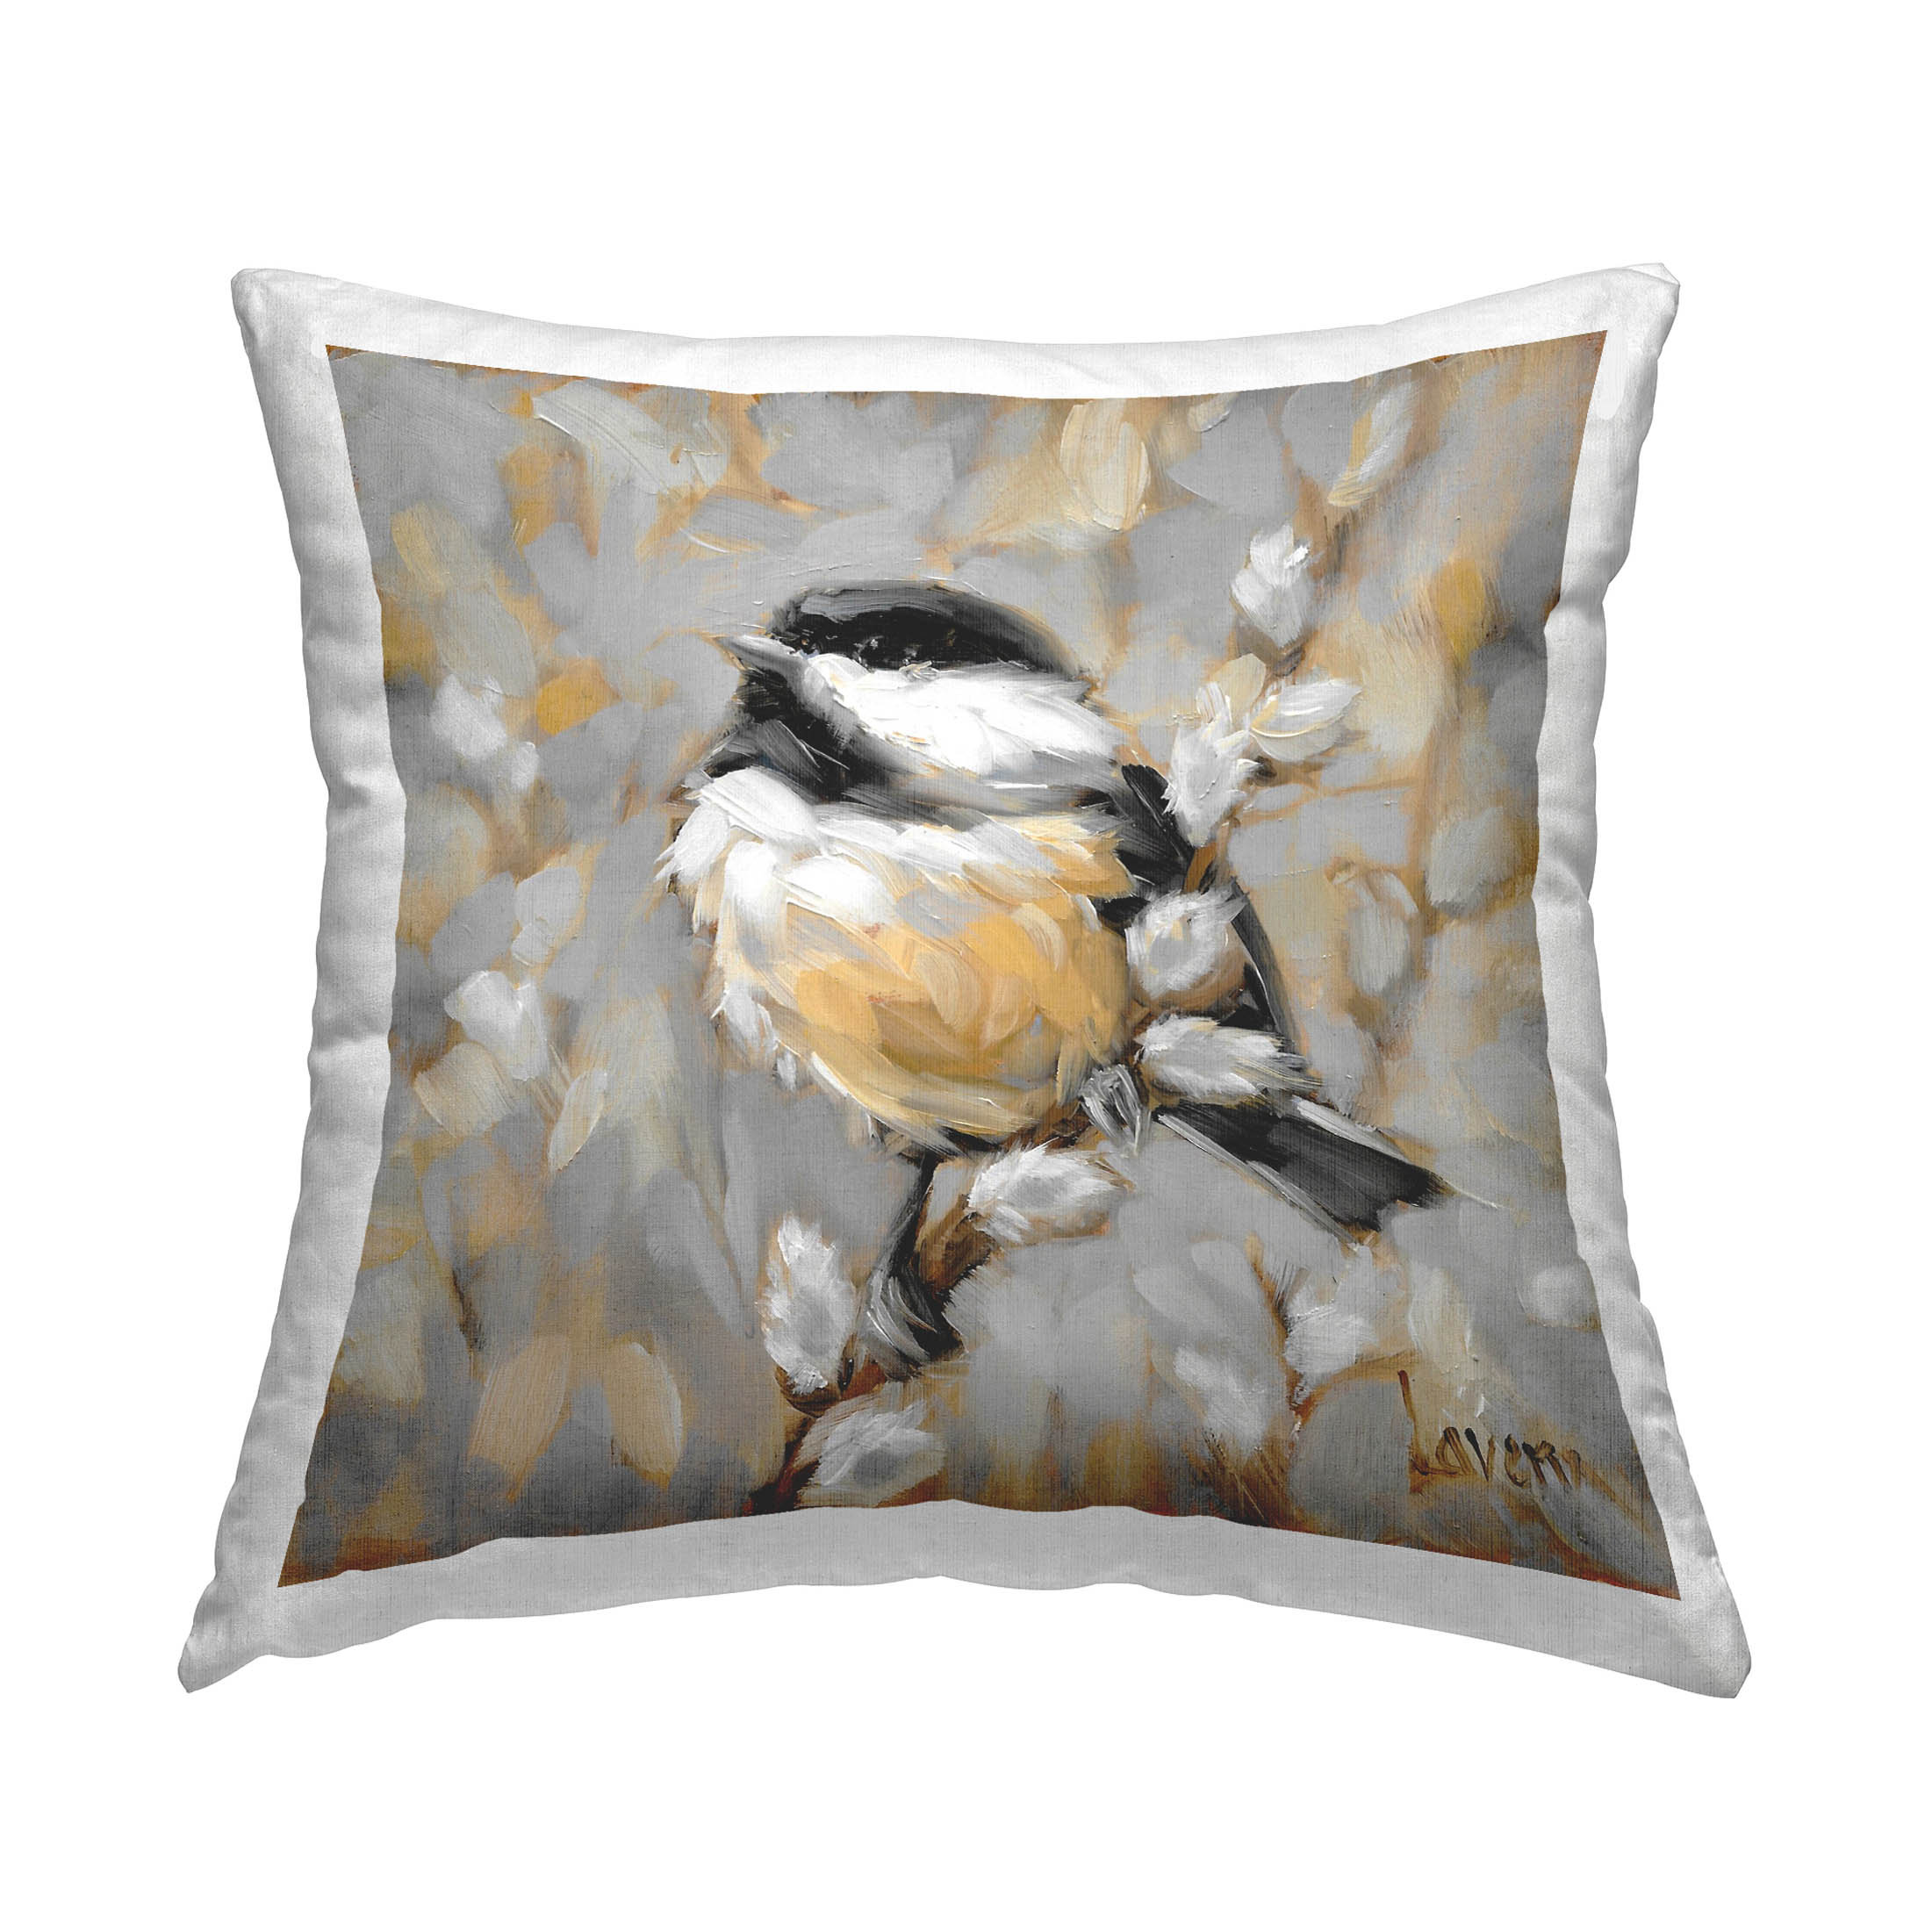 Bless international No Decorative Addition Polyester Throw Pillow & Reviews